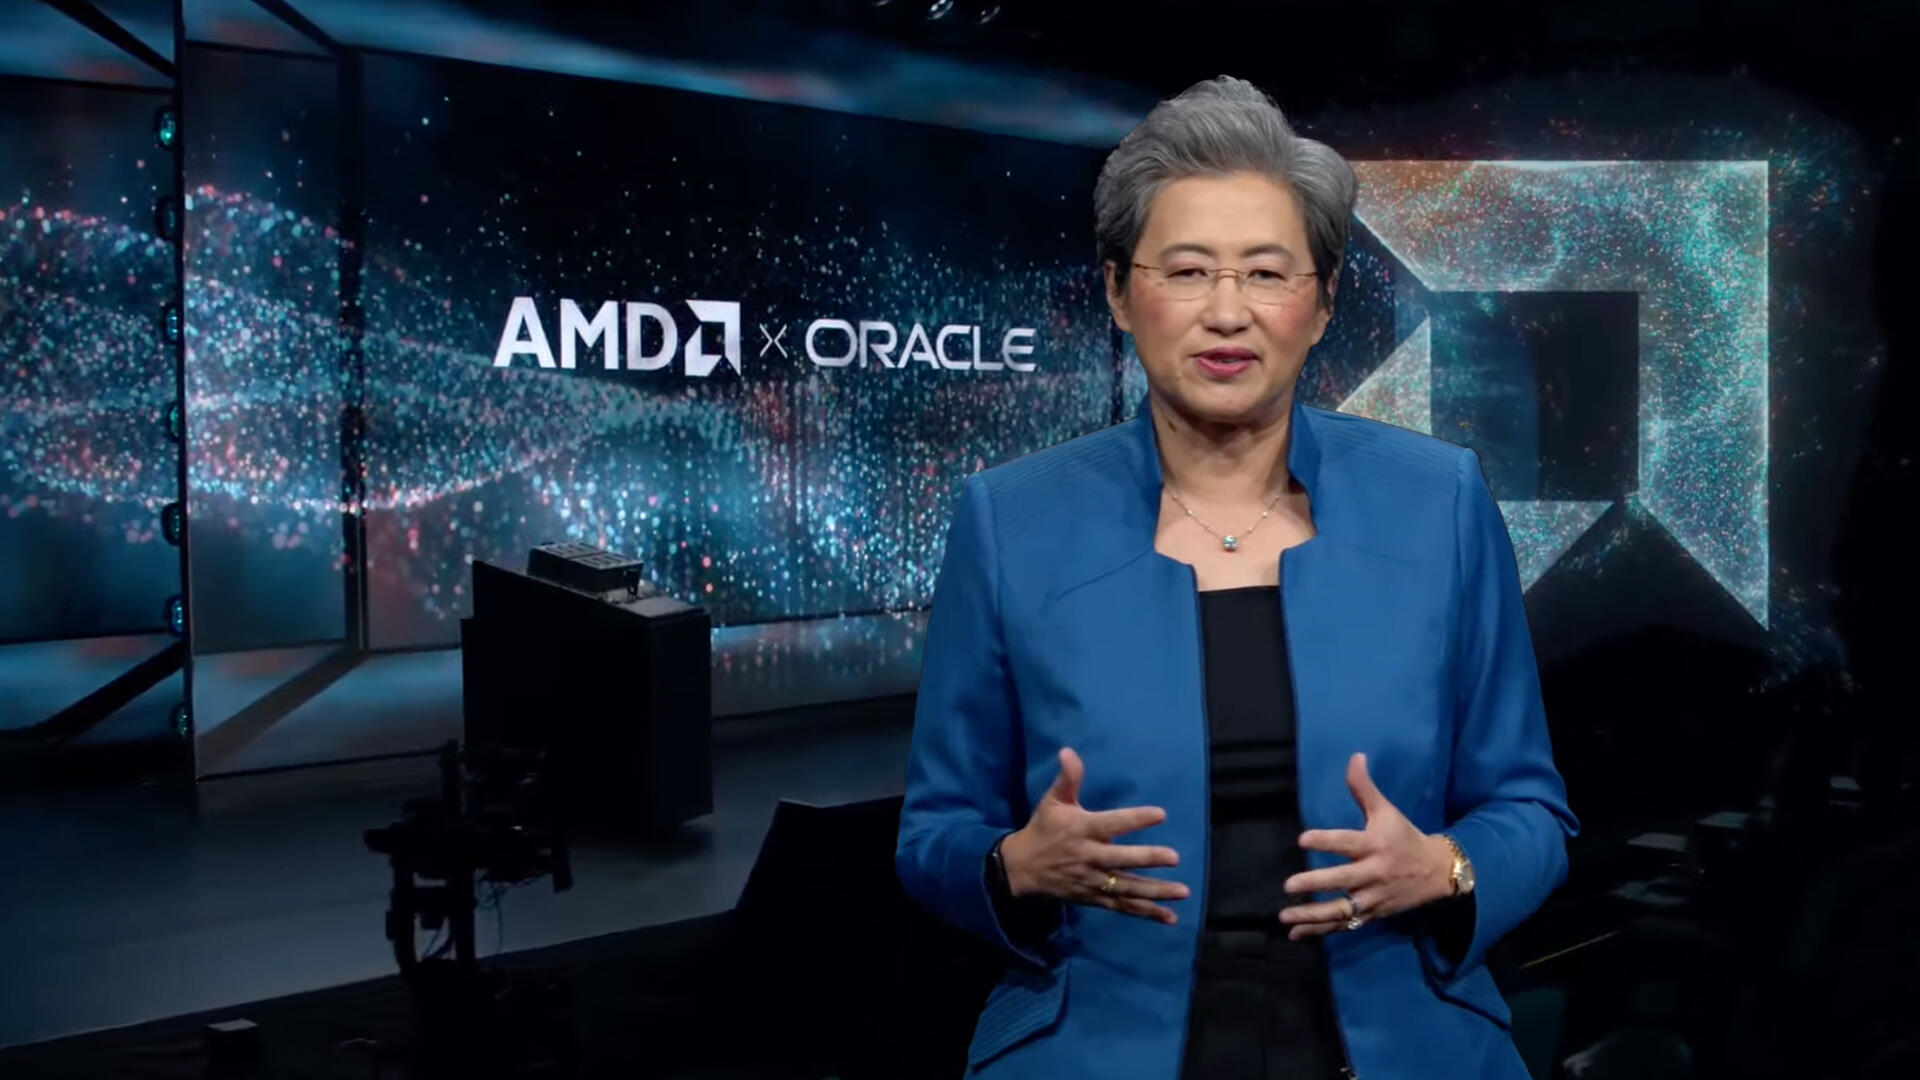 AMD's AI Chip Event: Everything Revealed in 8 Minutes | Haystack News